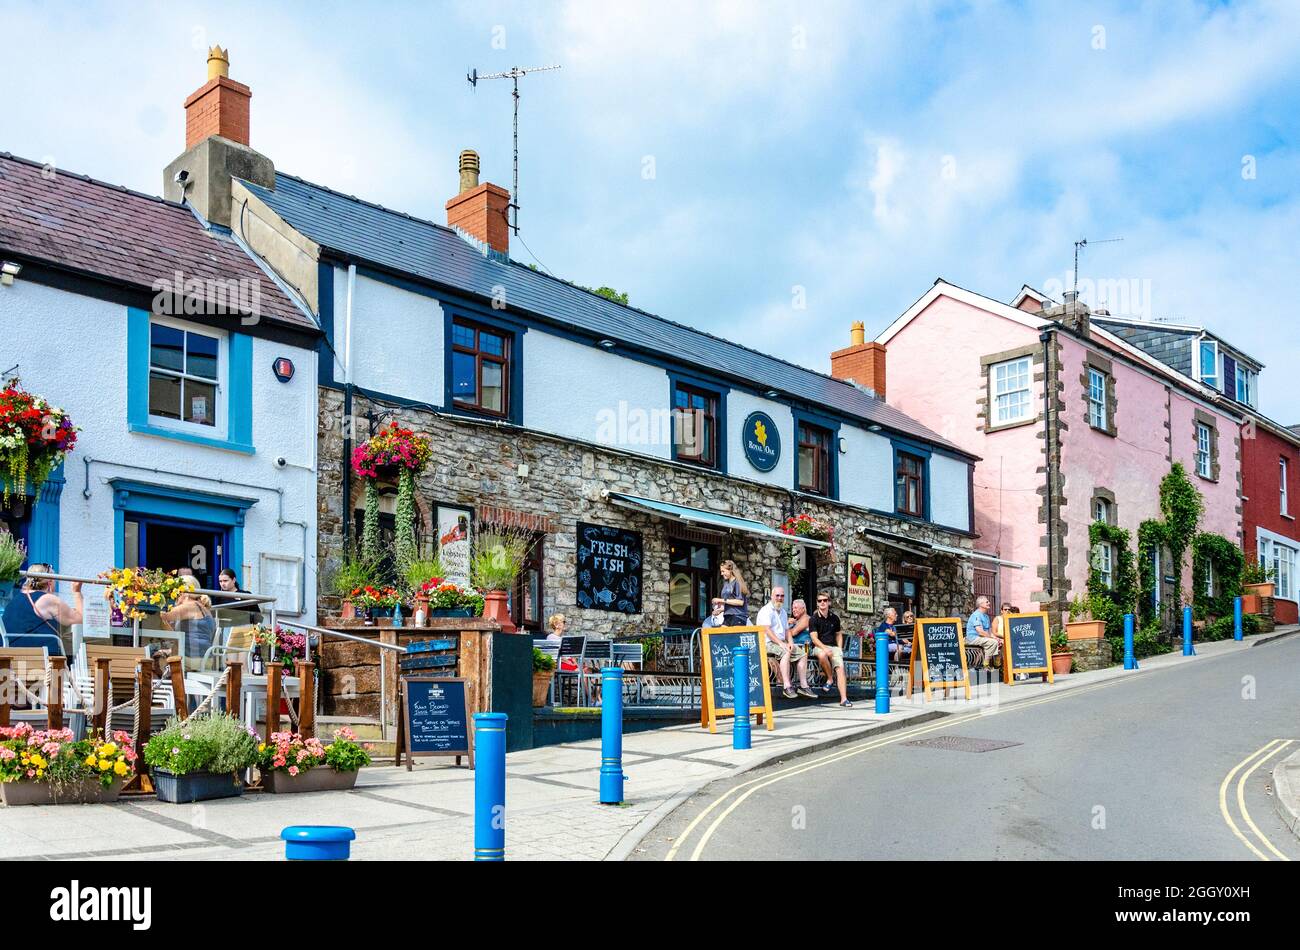 A view of The Royal Oak in on Wogan Terrace in Saundersfoot, Wales, UK on a summer's day with blue sky with broken cloud. Stock Photo